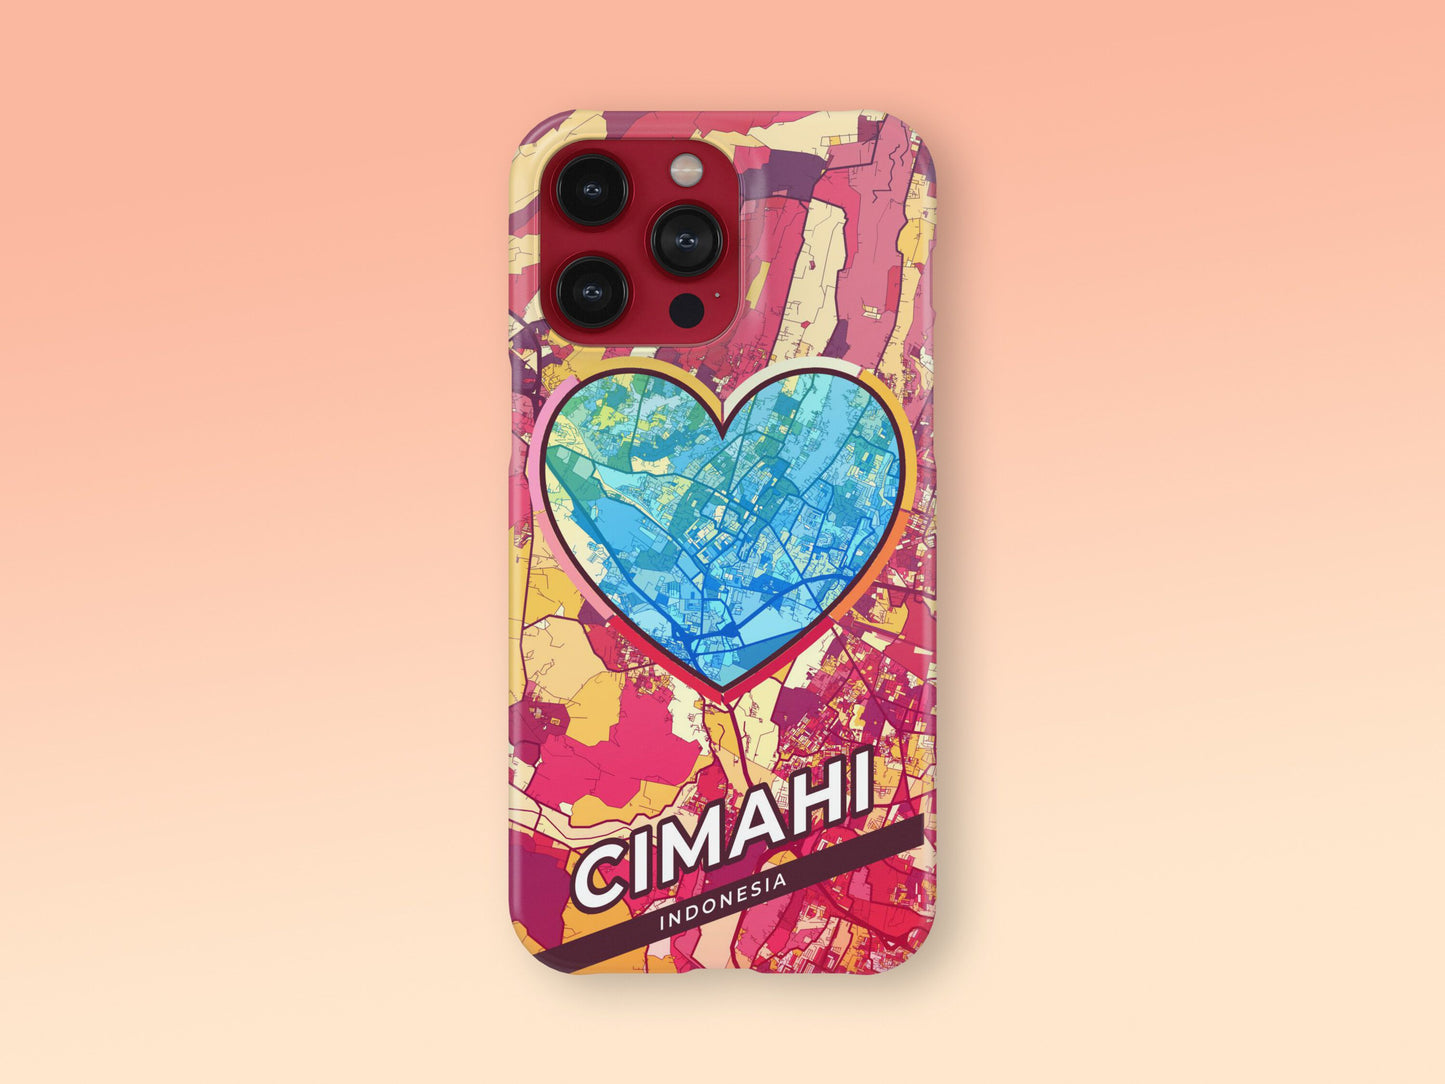 Cimahi Indonesia slim phone case with colorful icon. Birthday, wedding or housewarming gift. Couple match cases. 2